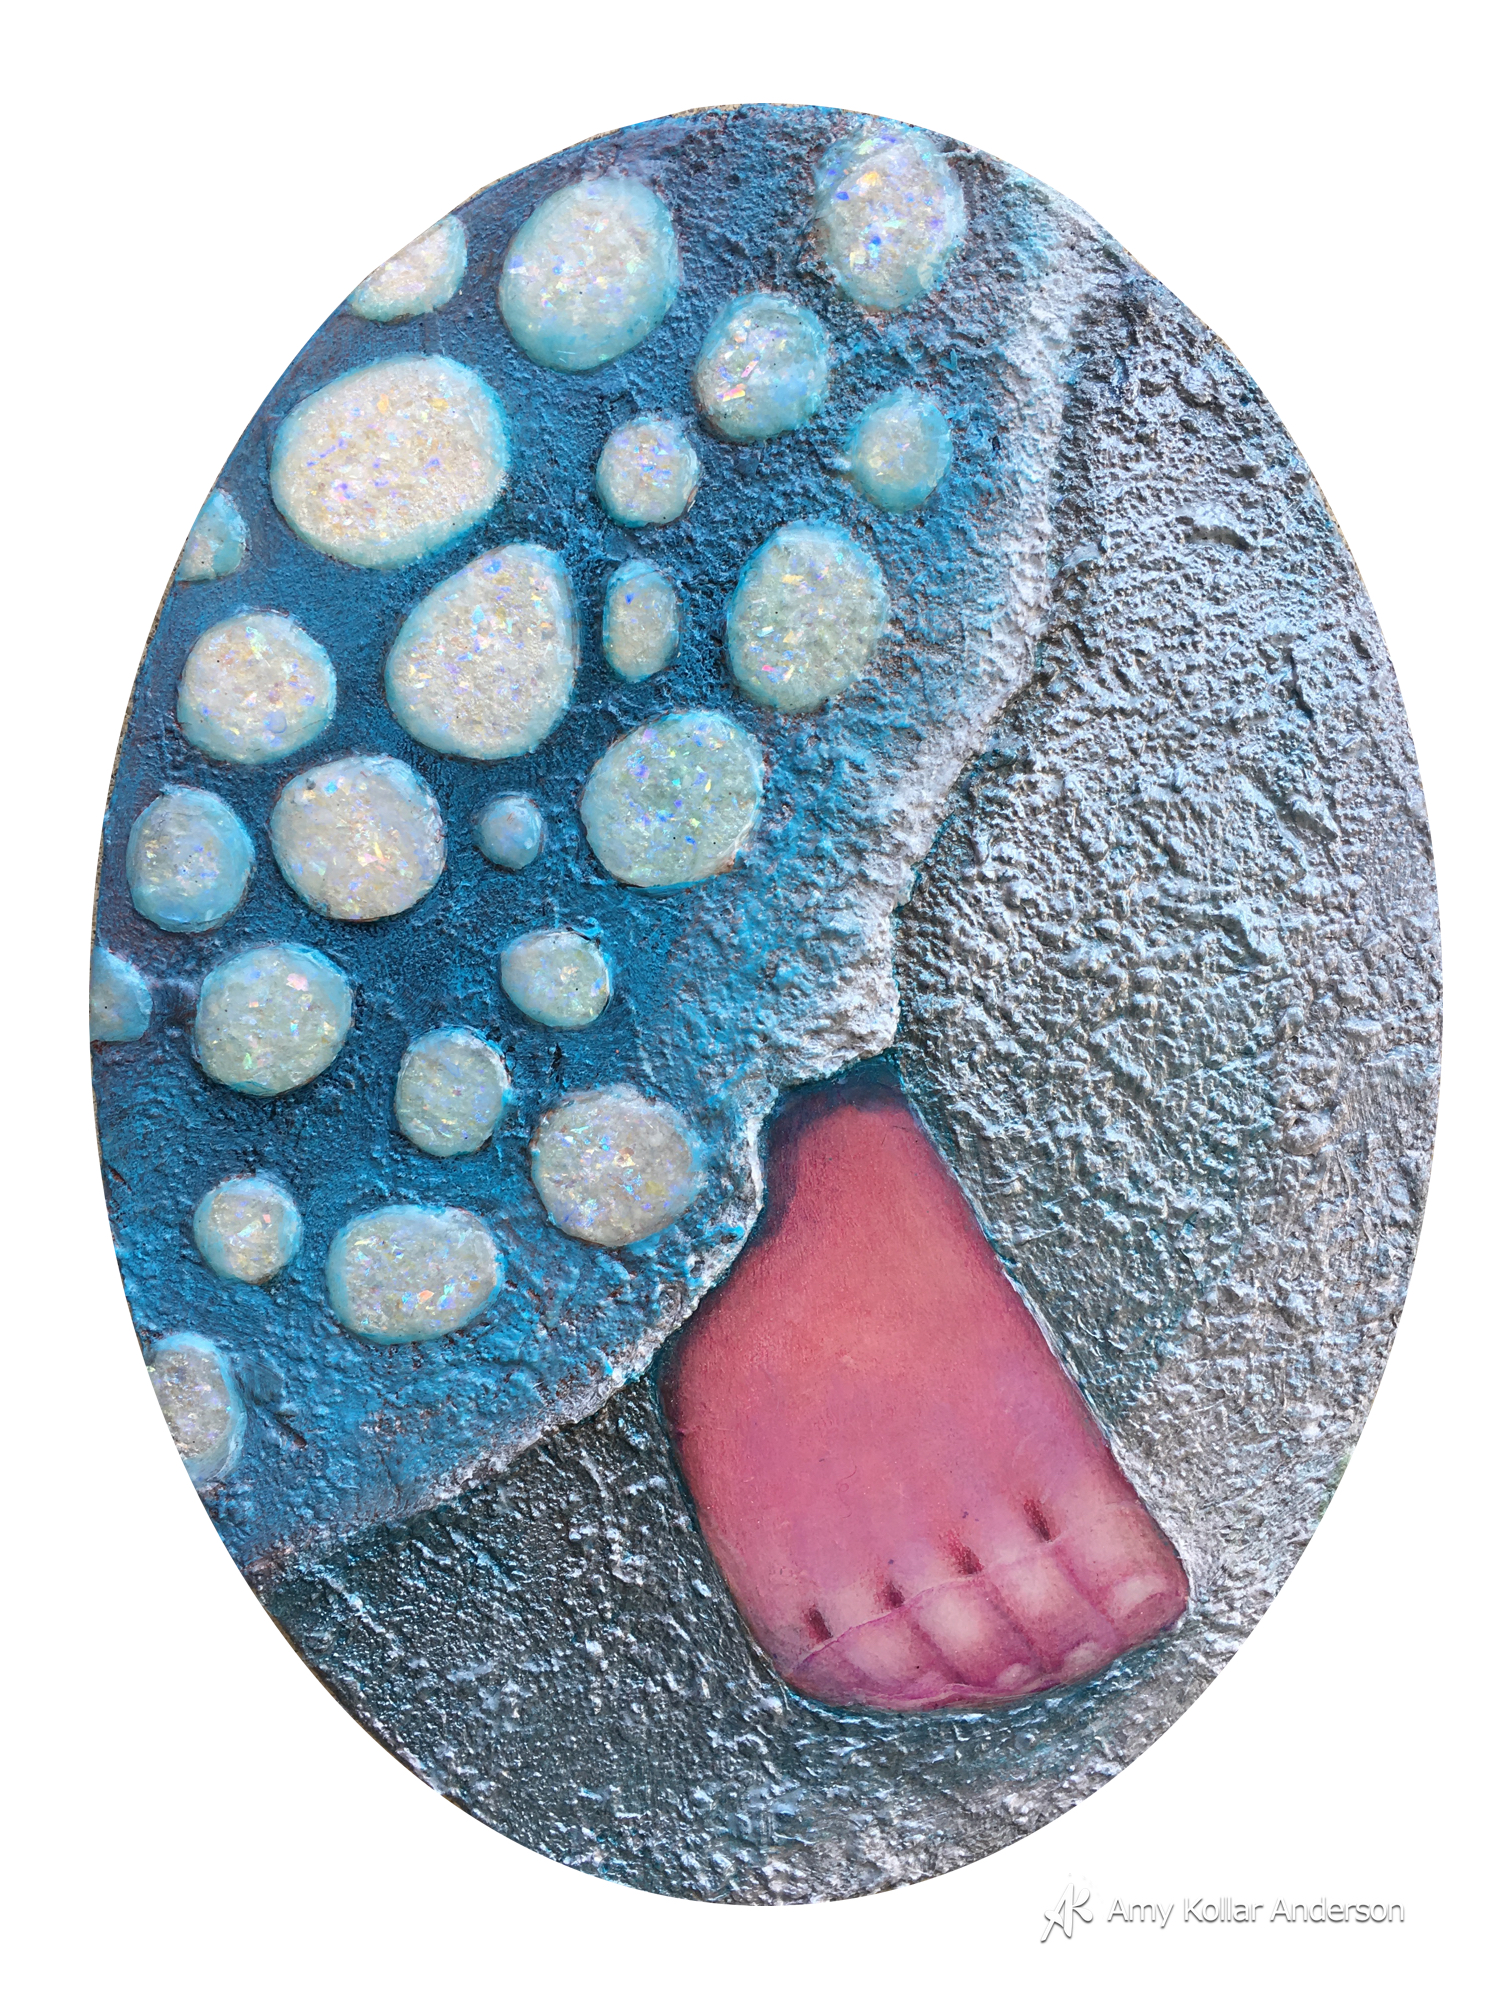  Chilly Toes : acrylic paint, pouring medium, glitter and lava paste  :&nbsp;6" x 8" x 1" : 2015   Available    